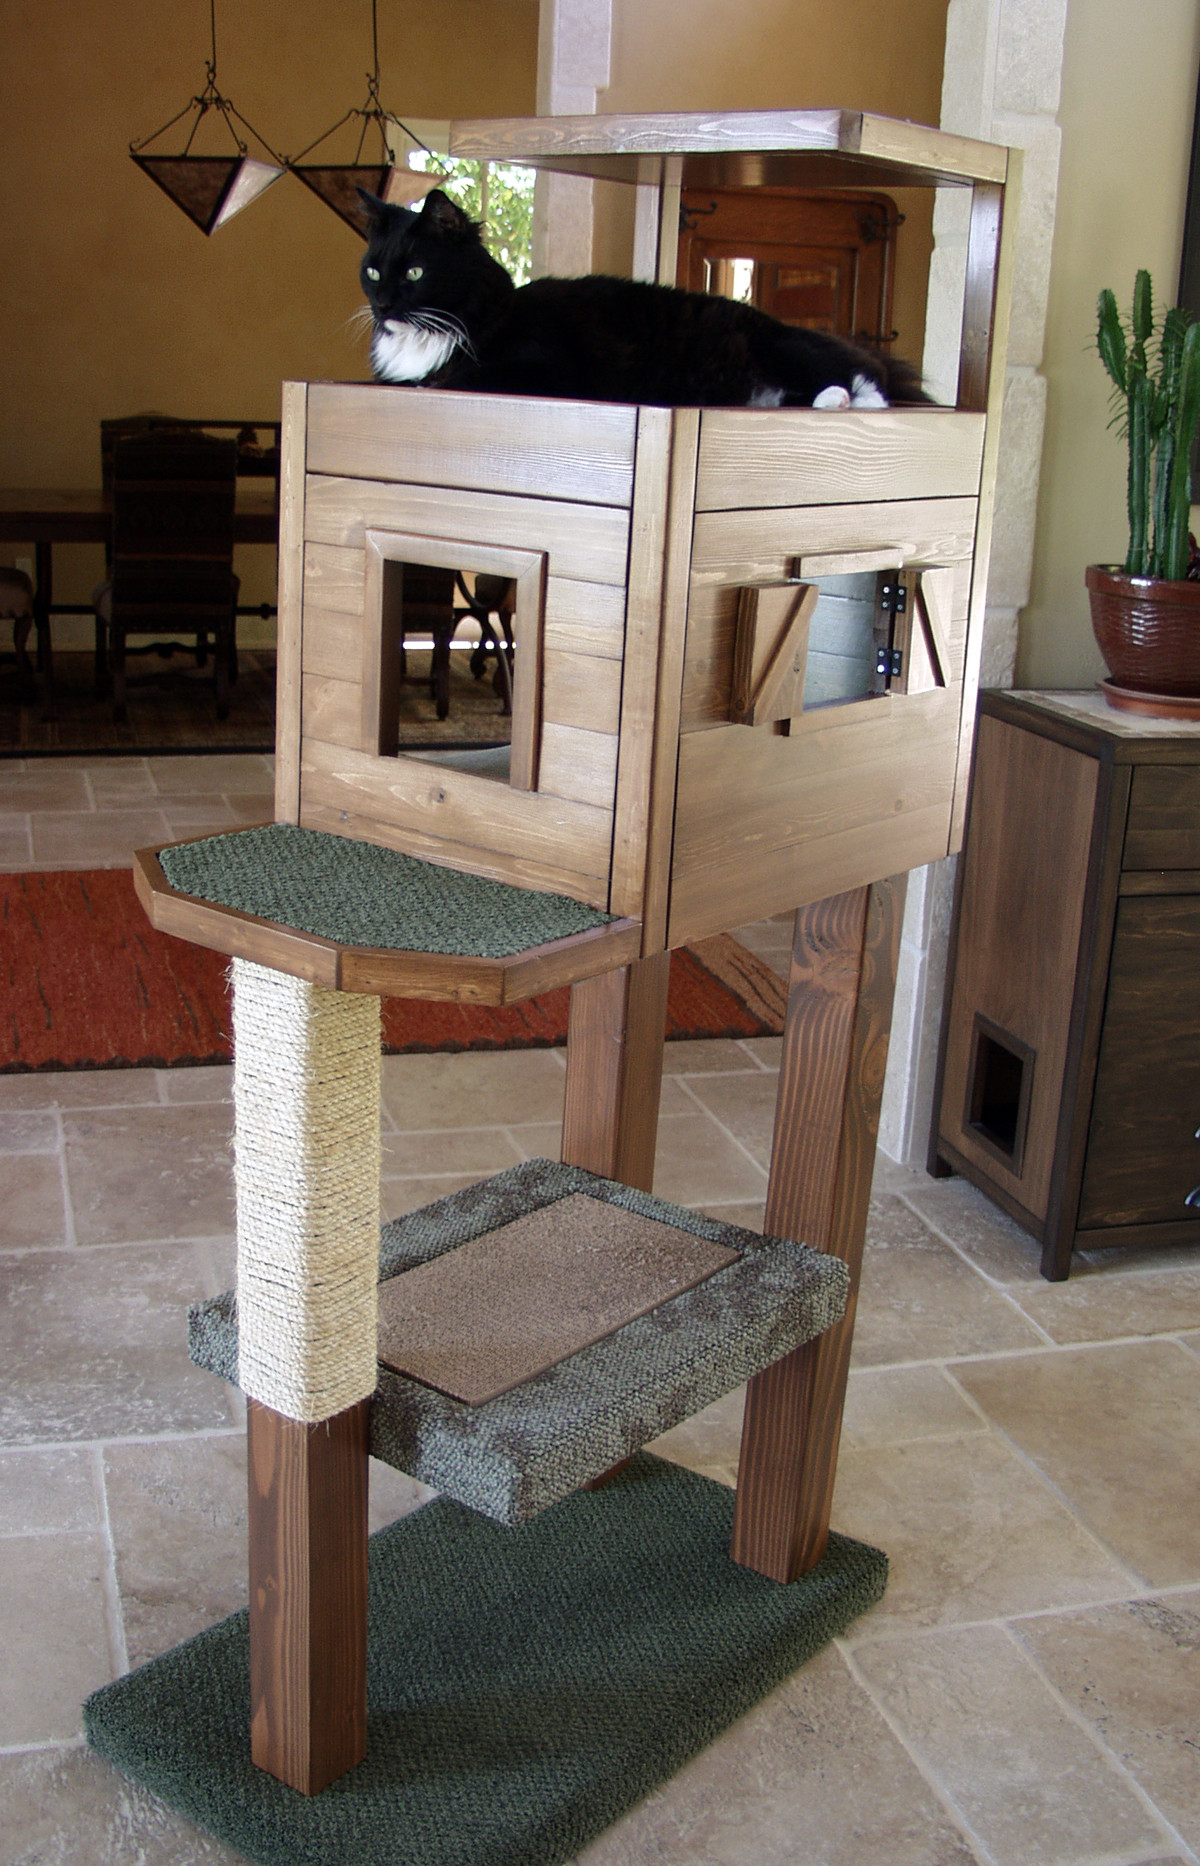 DIY Kitty Condos
 Homemade Cat Posts Trees and Houses